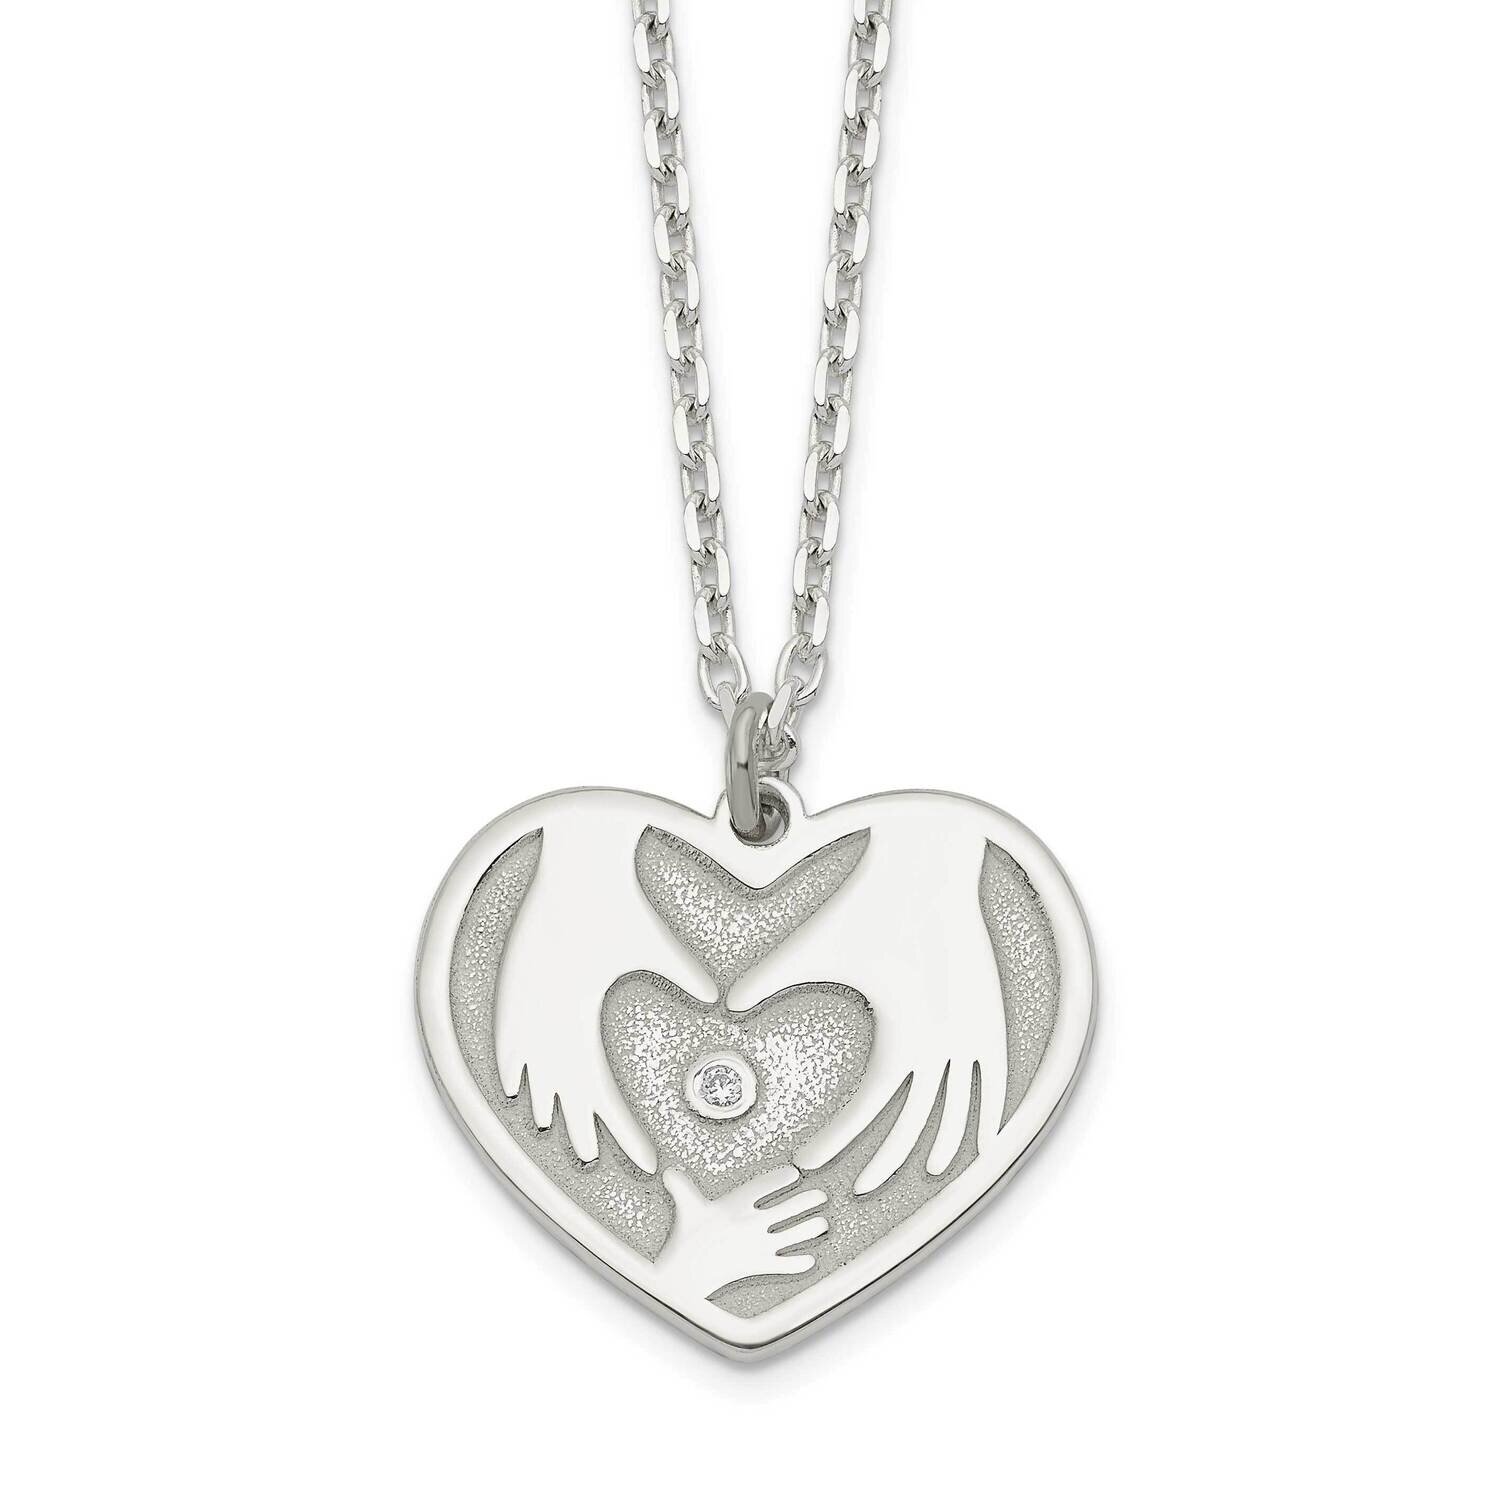 Hands In Heart Necklace 16 Inch Sterling Silver Cz Diamond QG6091-16